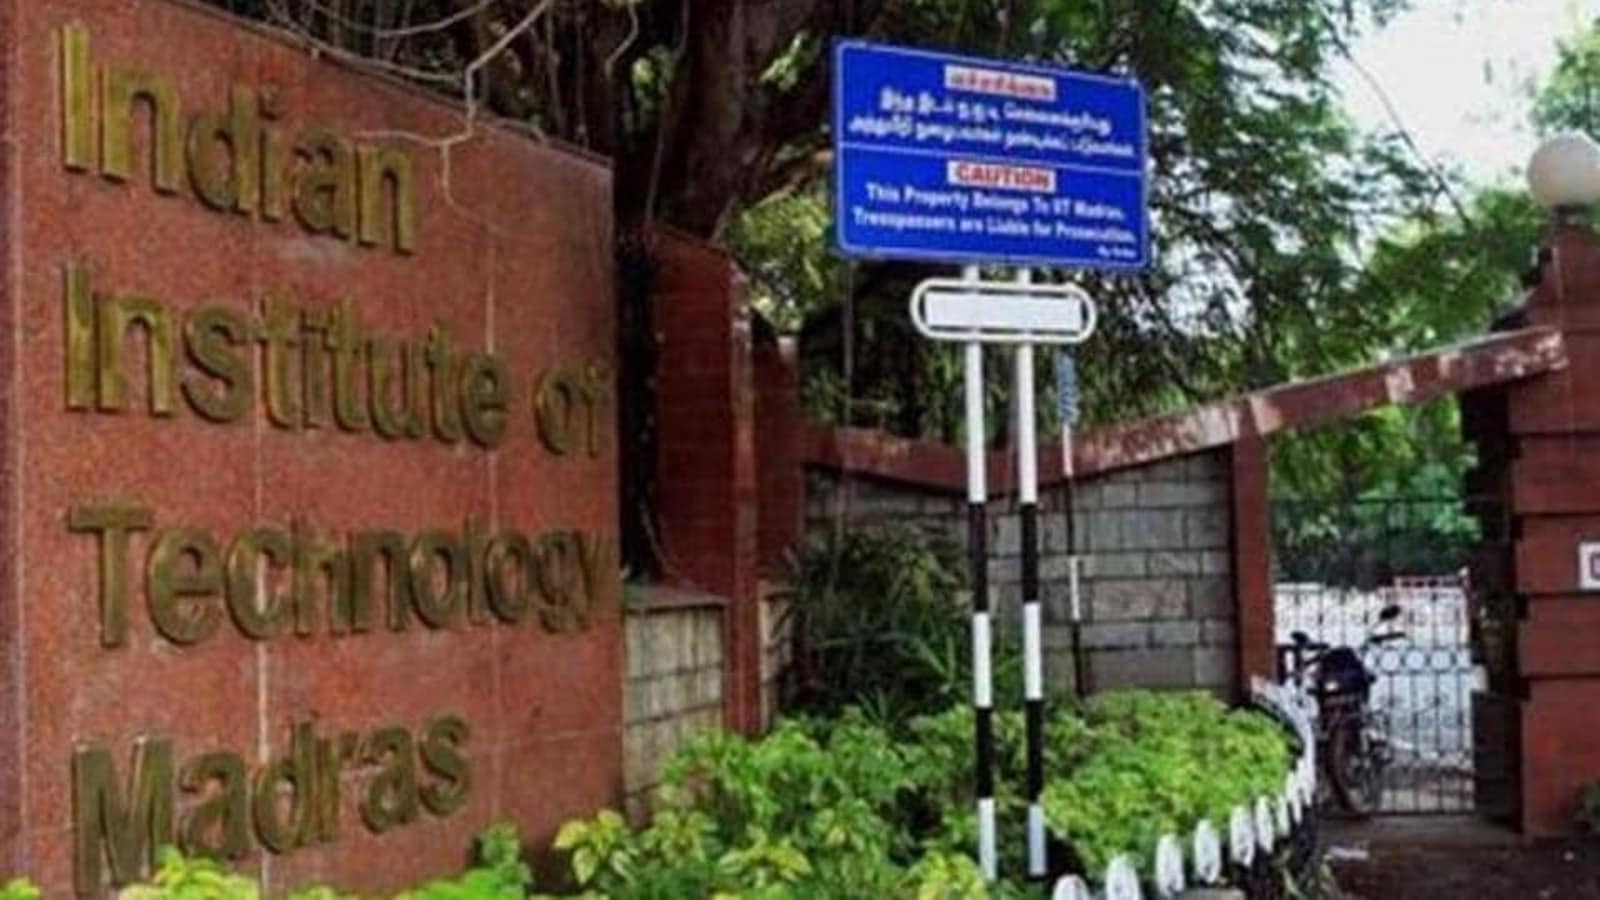 Now become an IITian without JEE! IIT Madras launches a new course